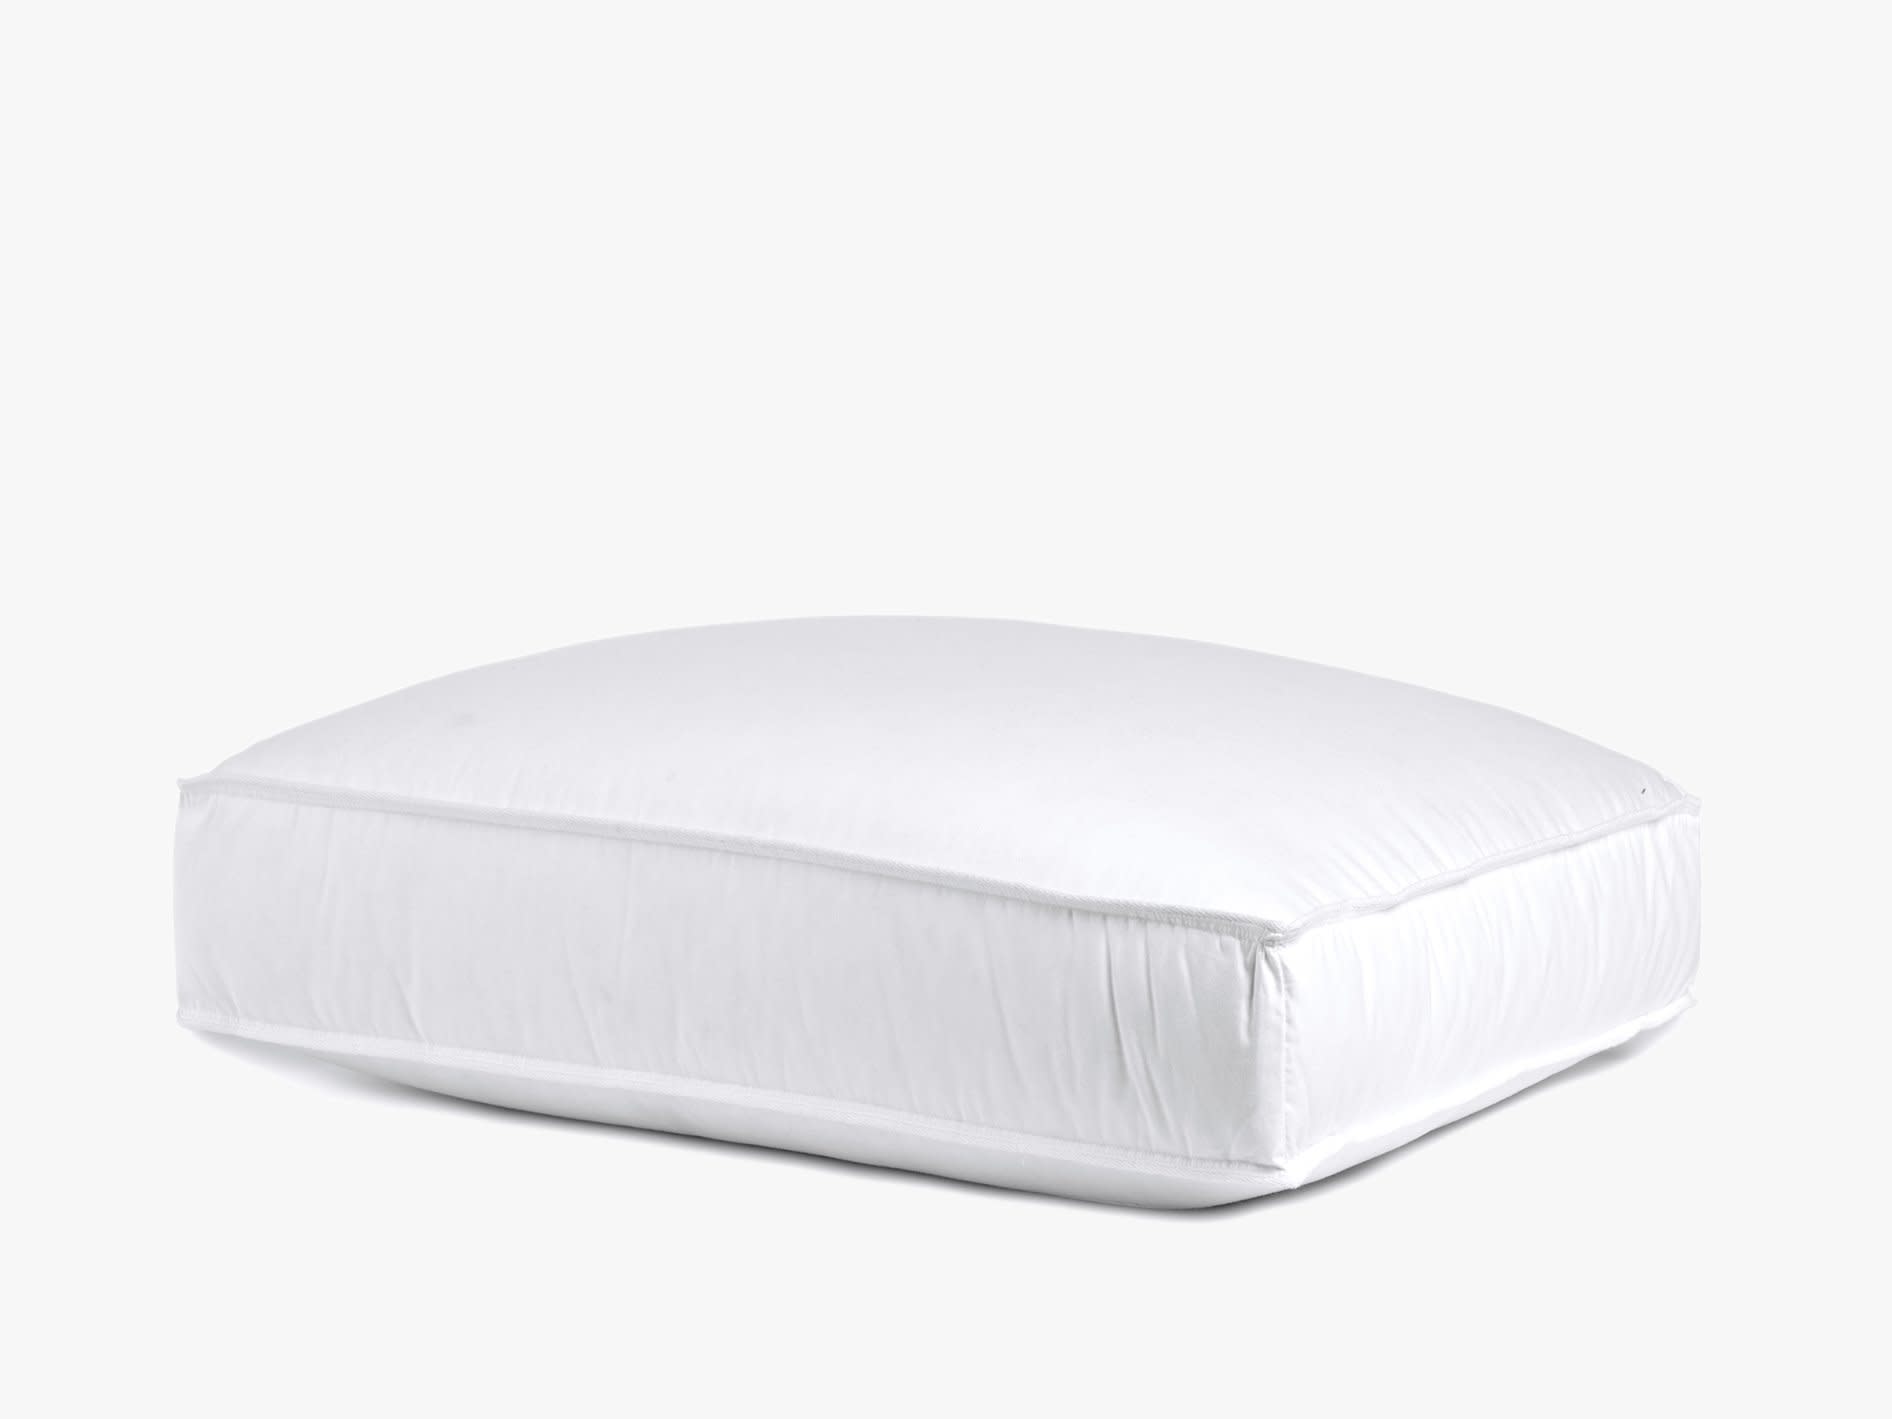 parachute side sleeper pillow, one of the best pillows for side sleepers